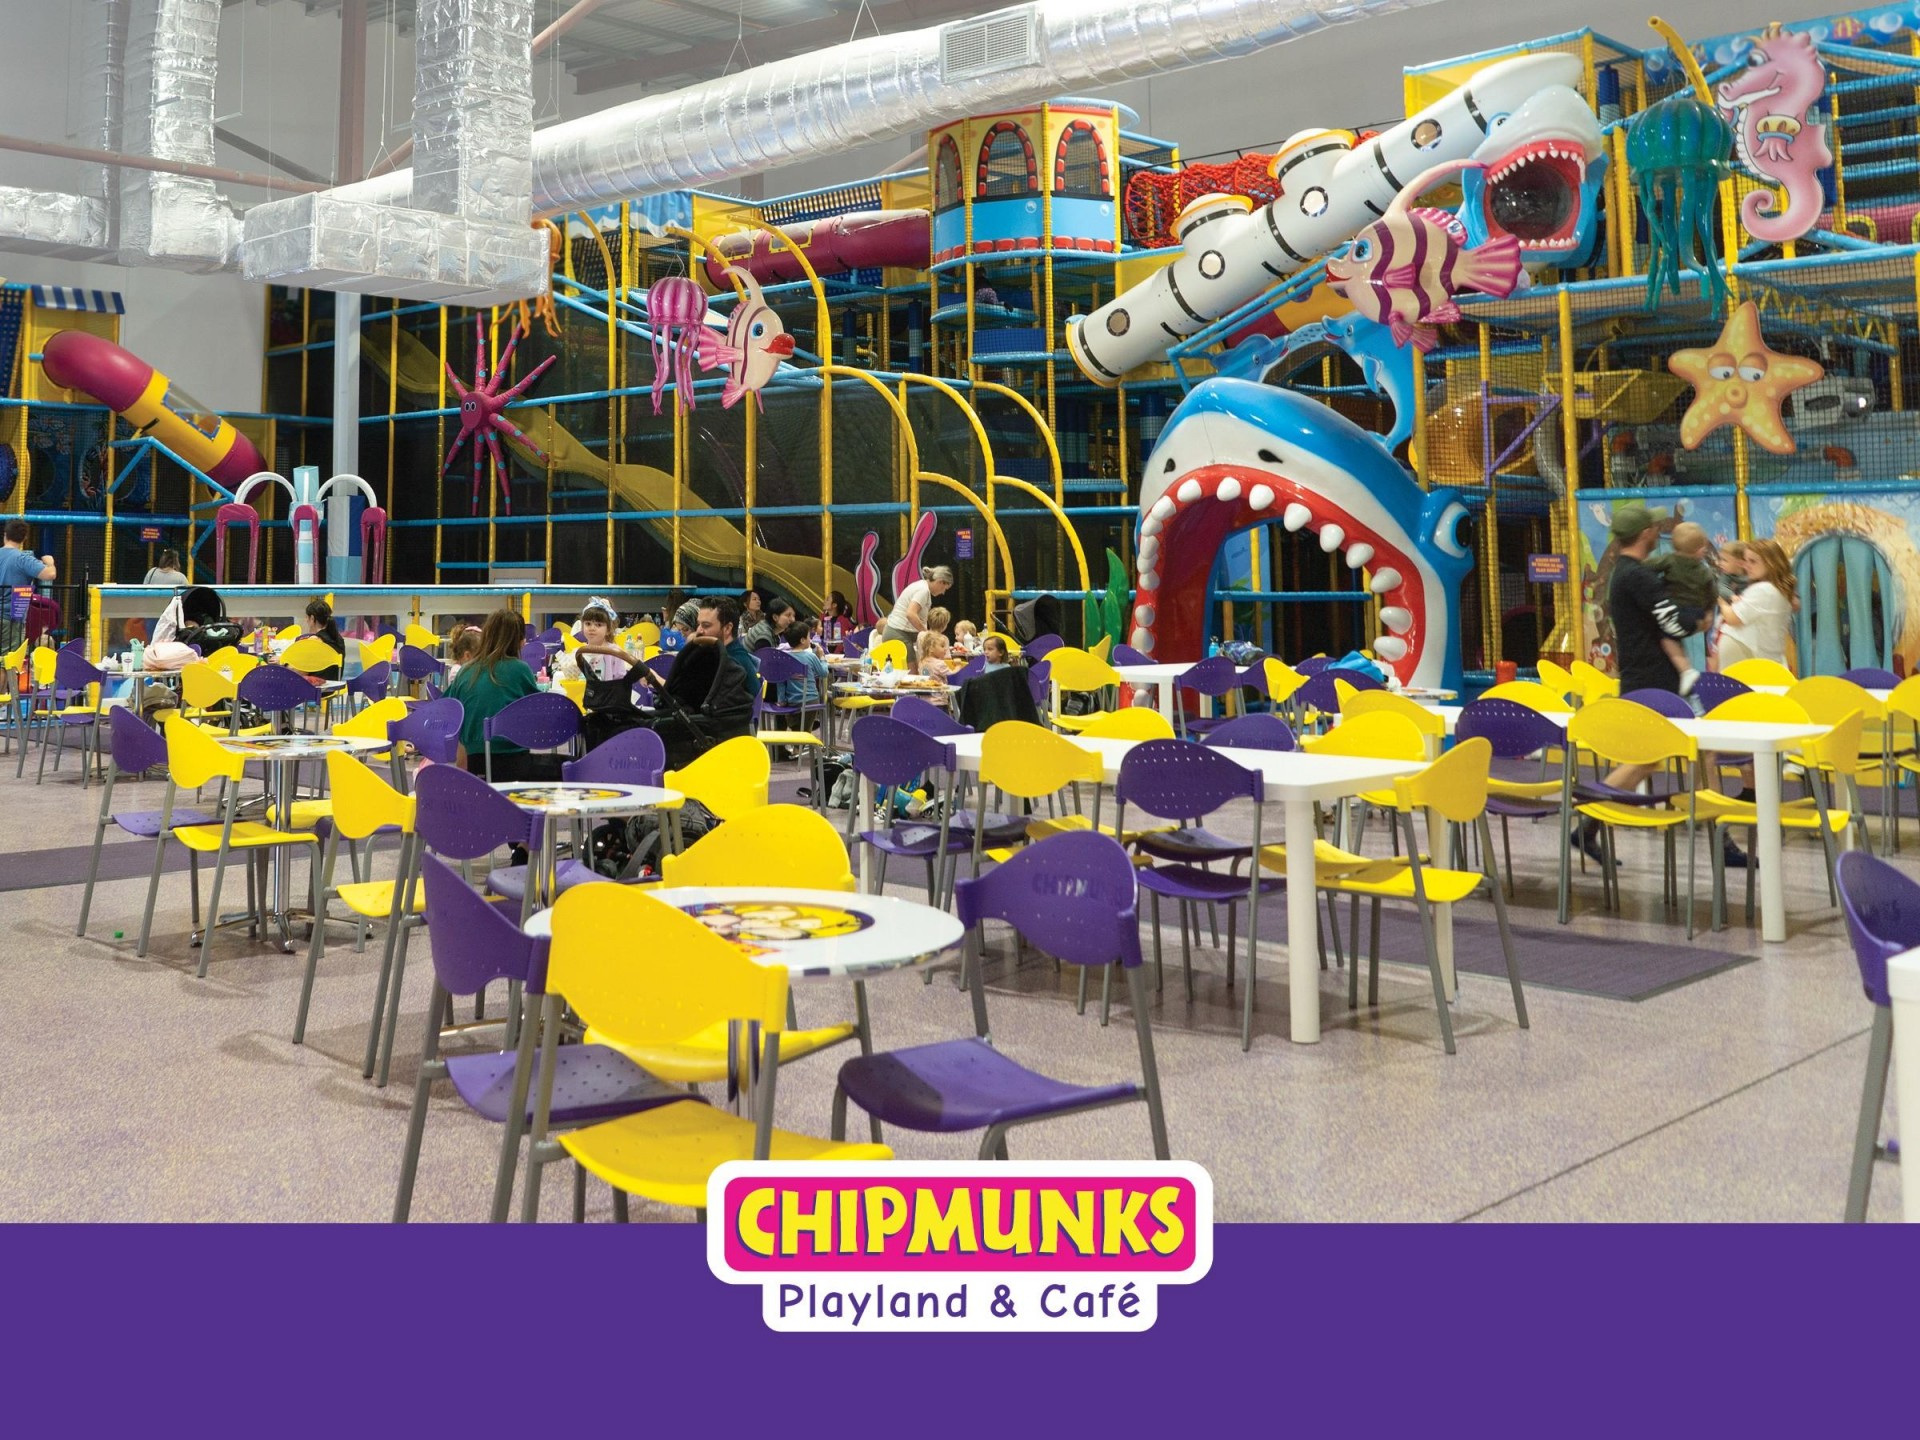 Chipmunks indoor playground franchise for sale - West Lakes